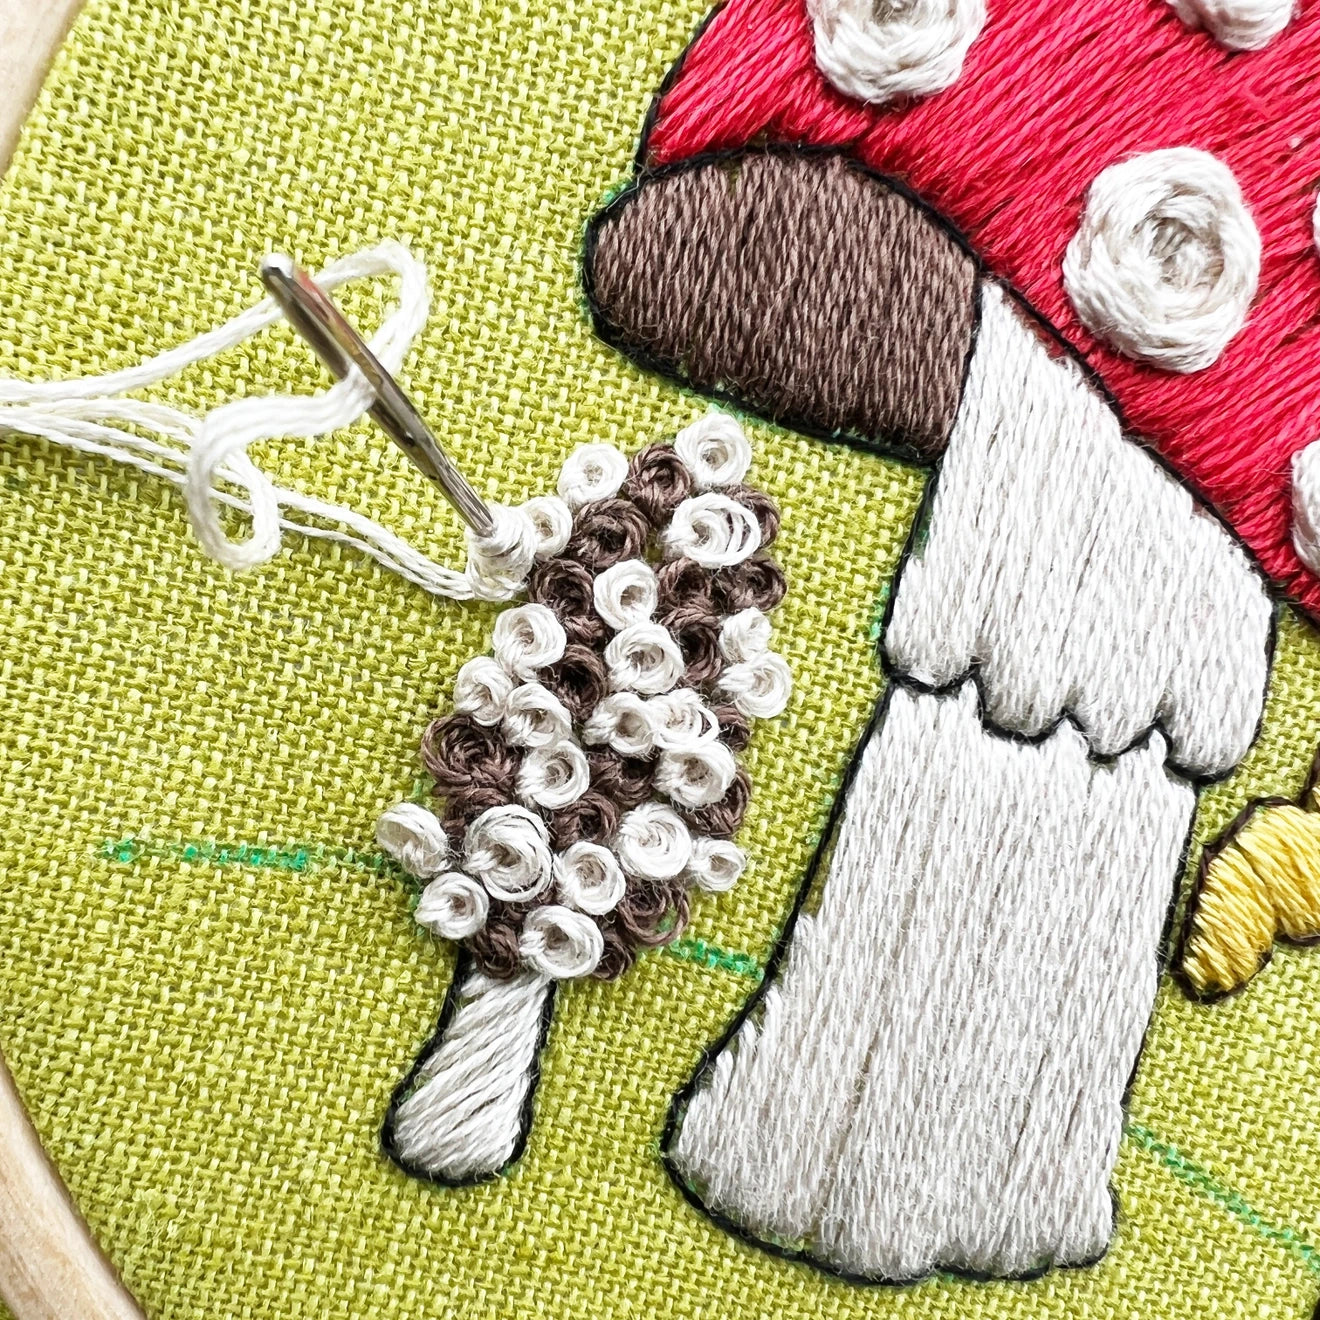 Learn to Embroider Kit - 5 Basic and Fancy Stitches - Mushrooms All Around